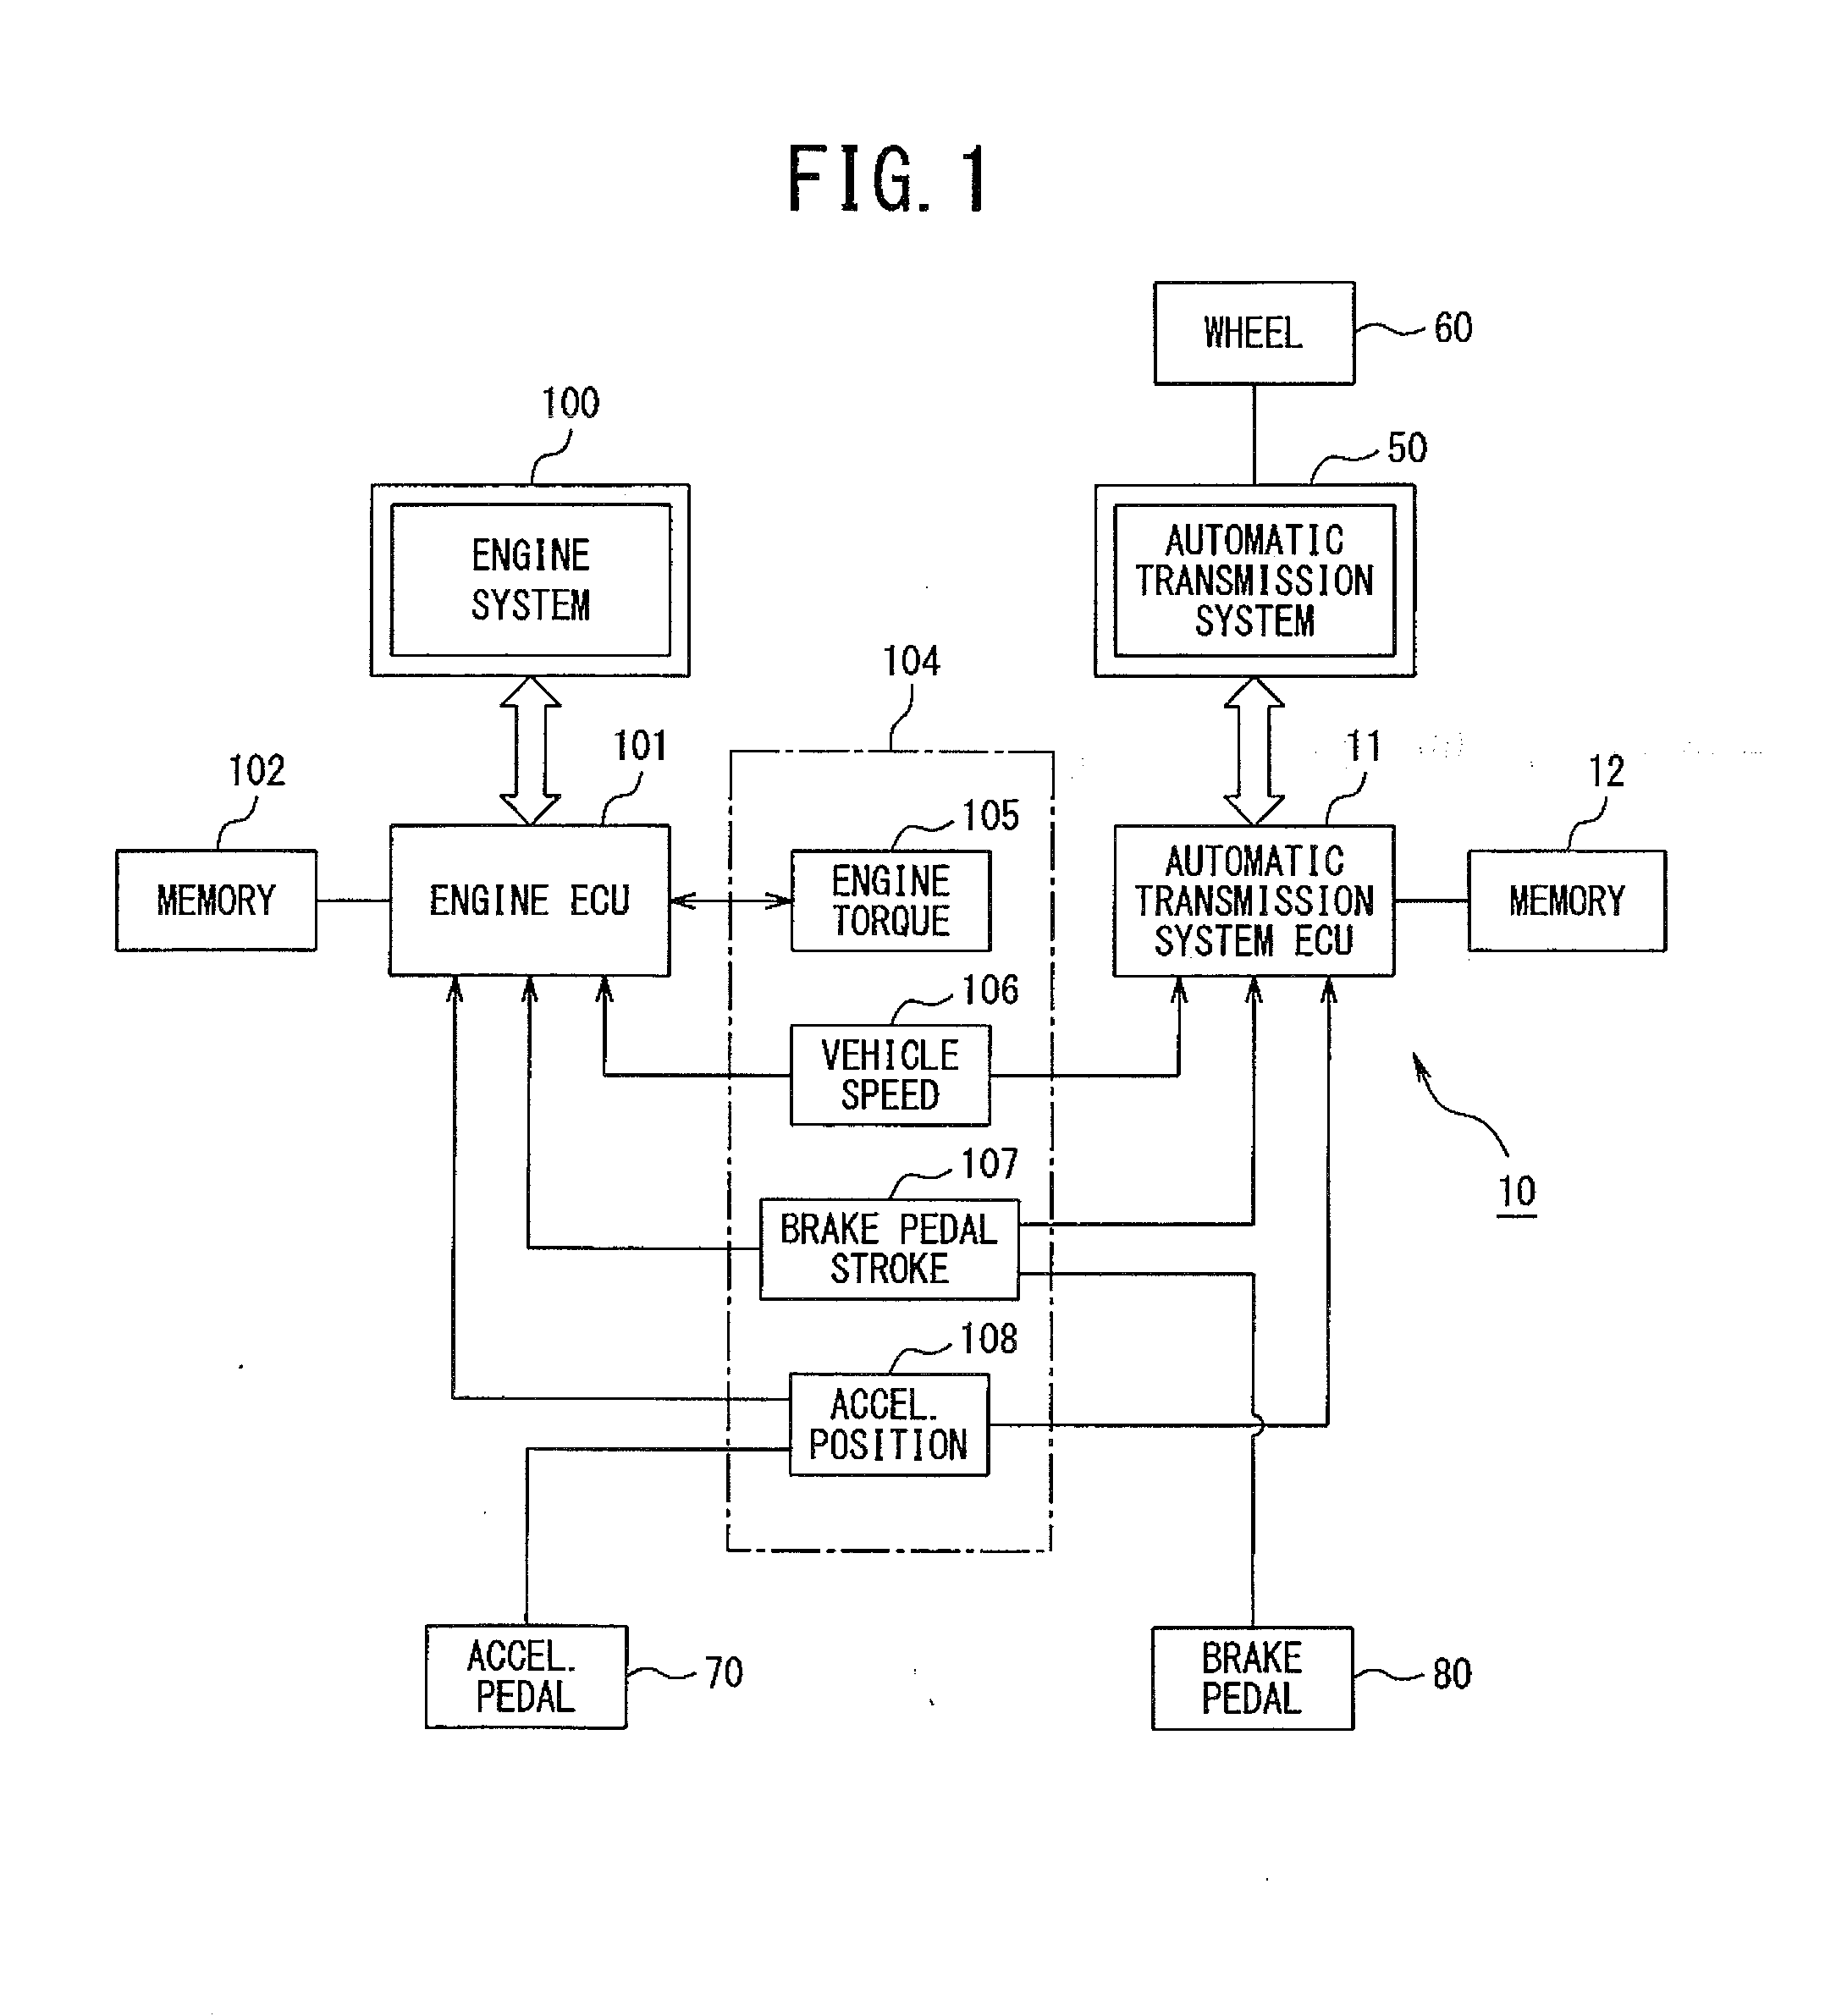 Gear shift control system for automatic transmission